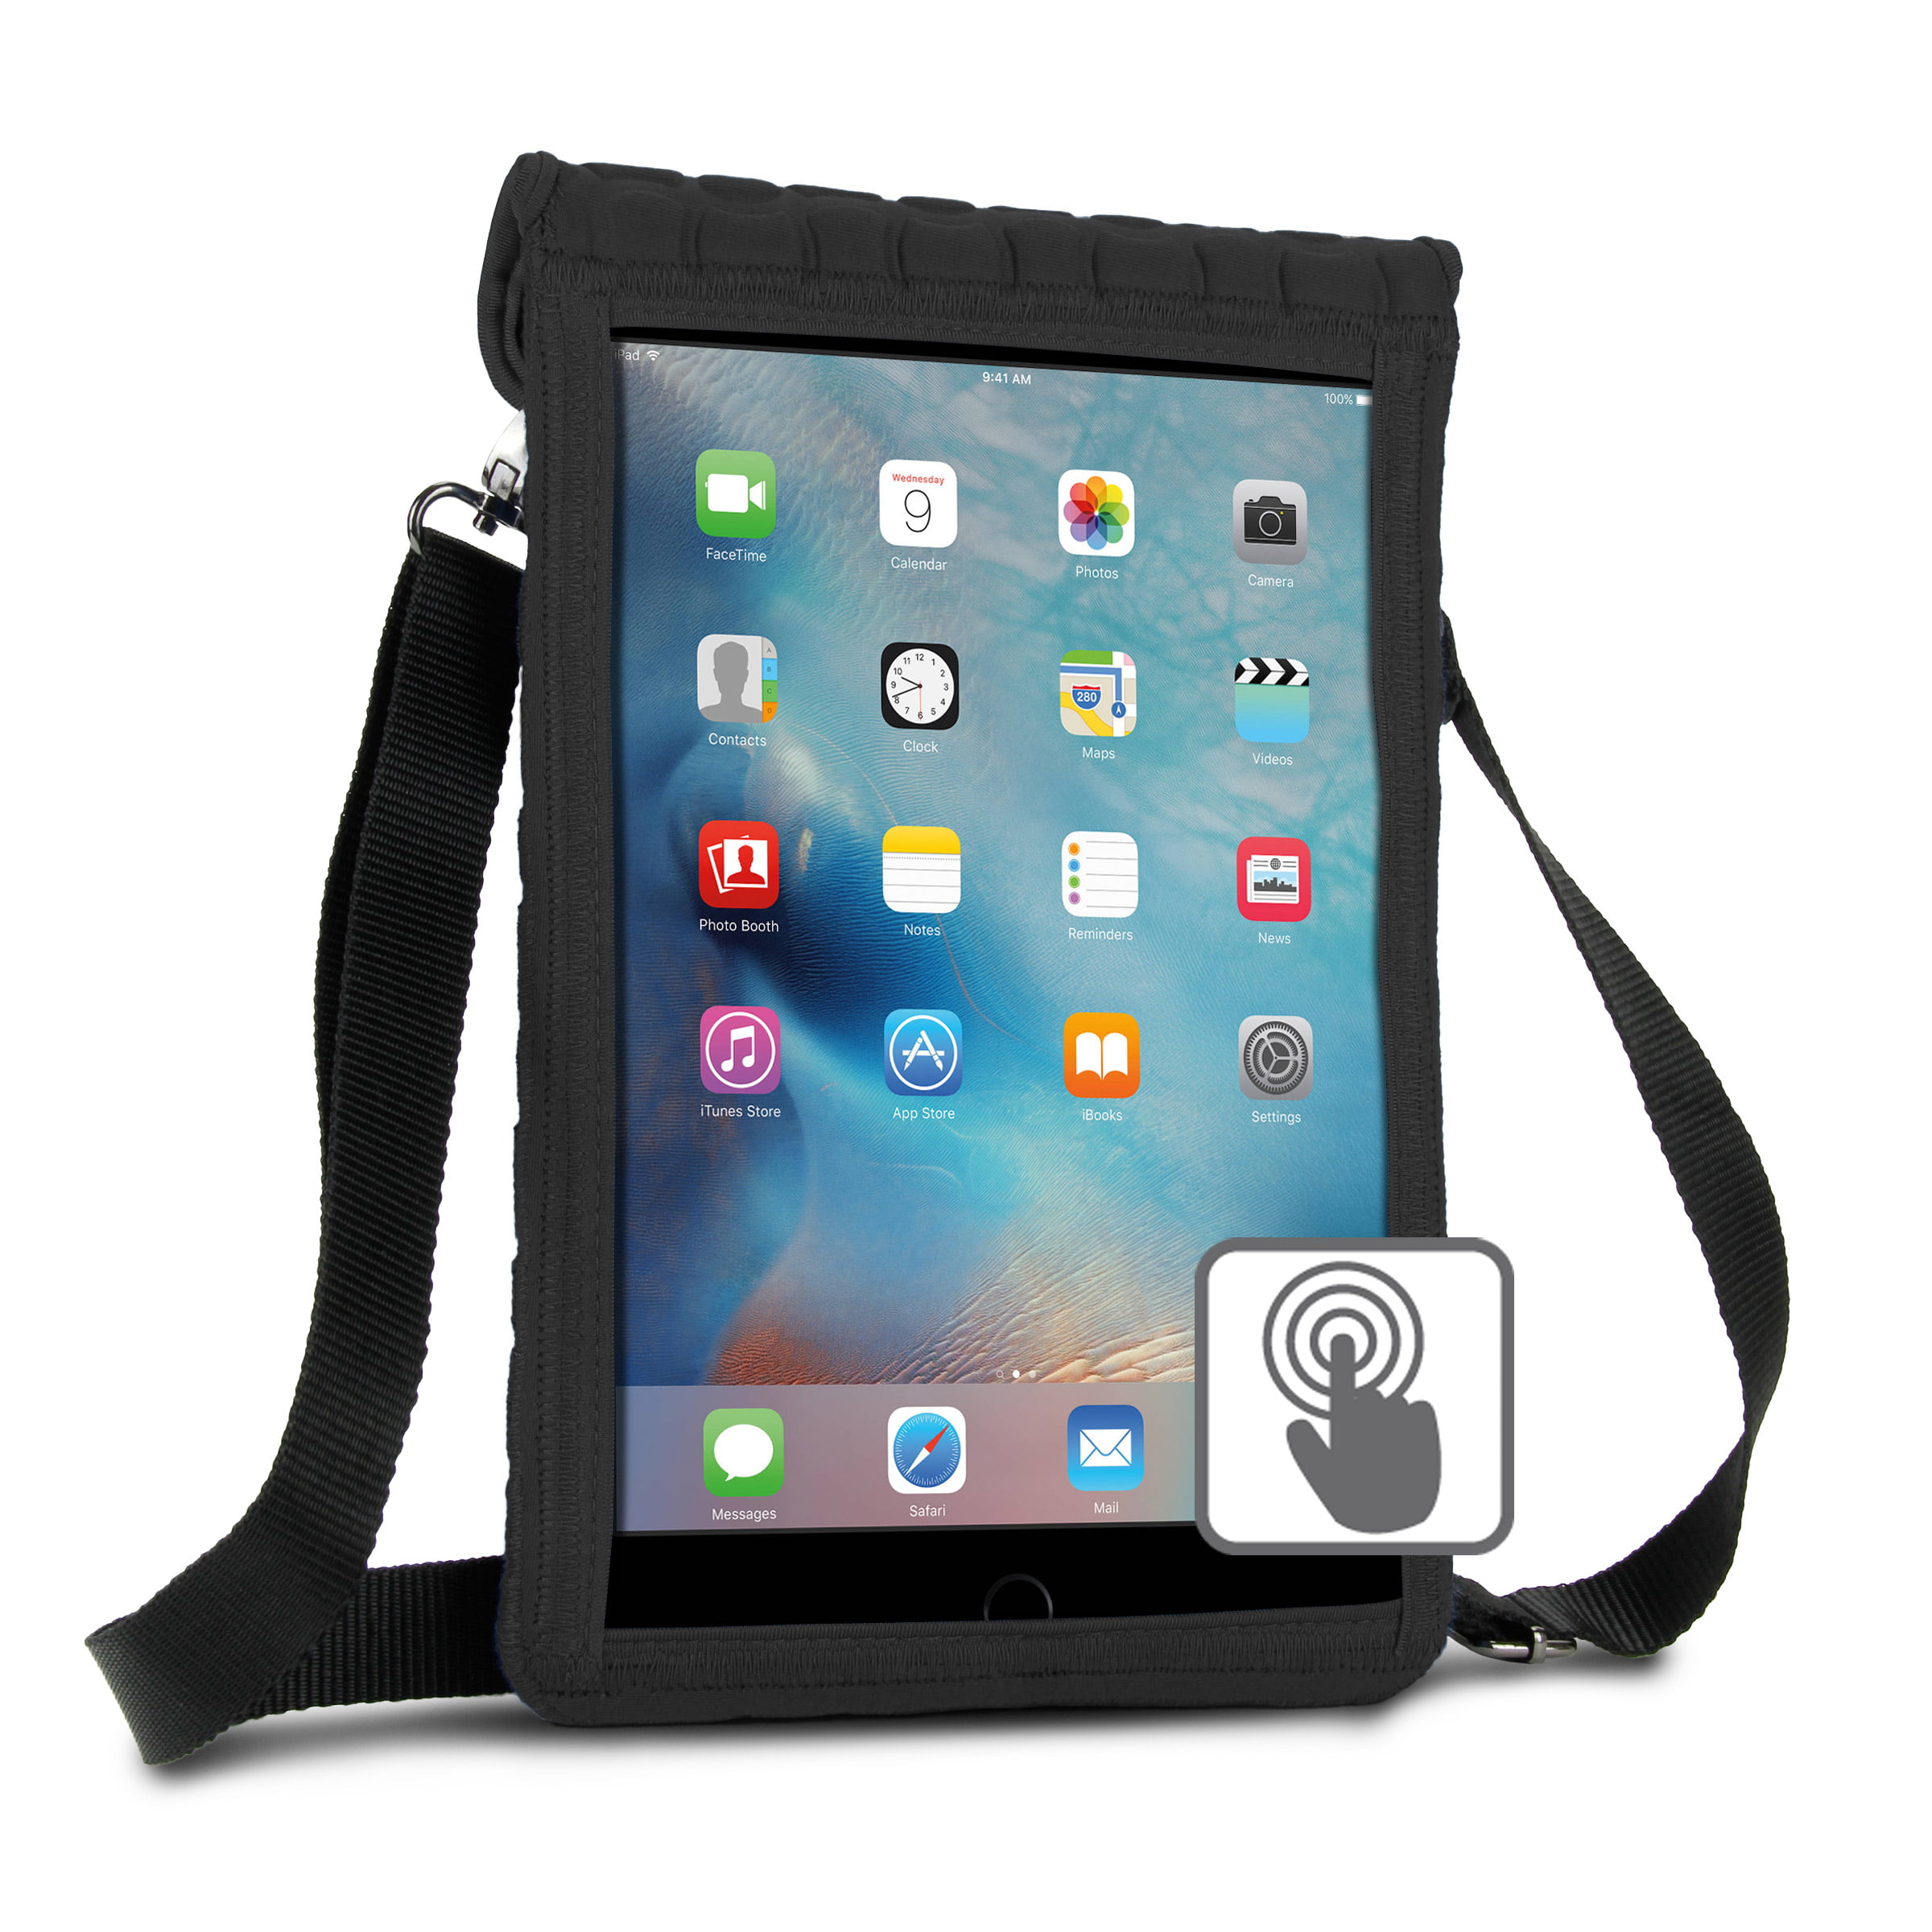 Blue Shockproof Soft Silicone Handle & Adjustable Stand Cover with Shoulder Strap Full Protective Kids Case for iPad 9.7 2018/2017/iPad Air/iPad Air 2 Surom Kids Case for New iPad 9.7 2018/2017